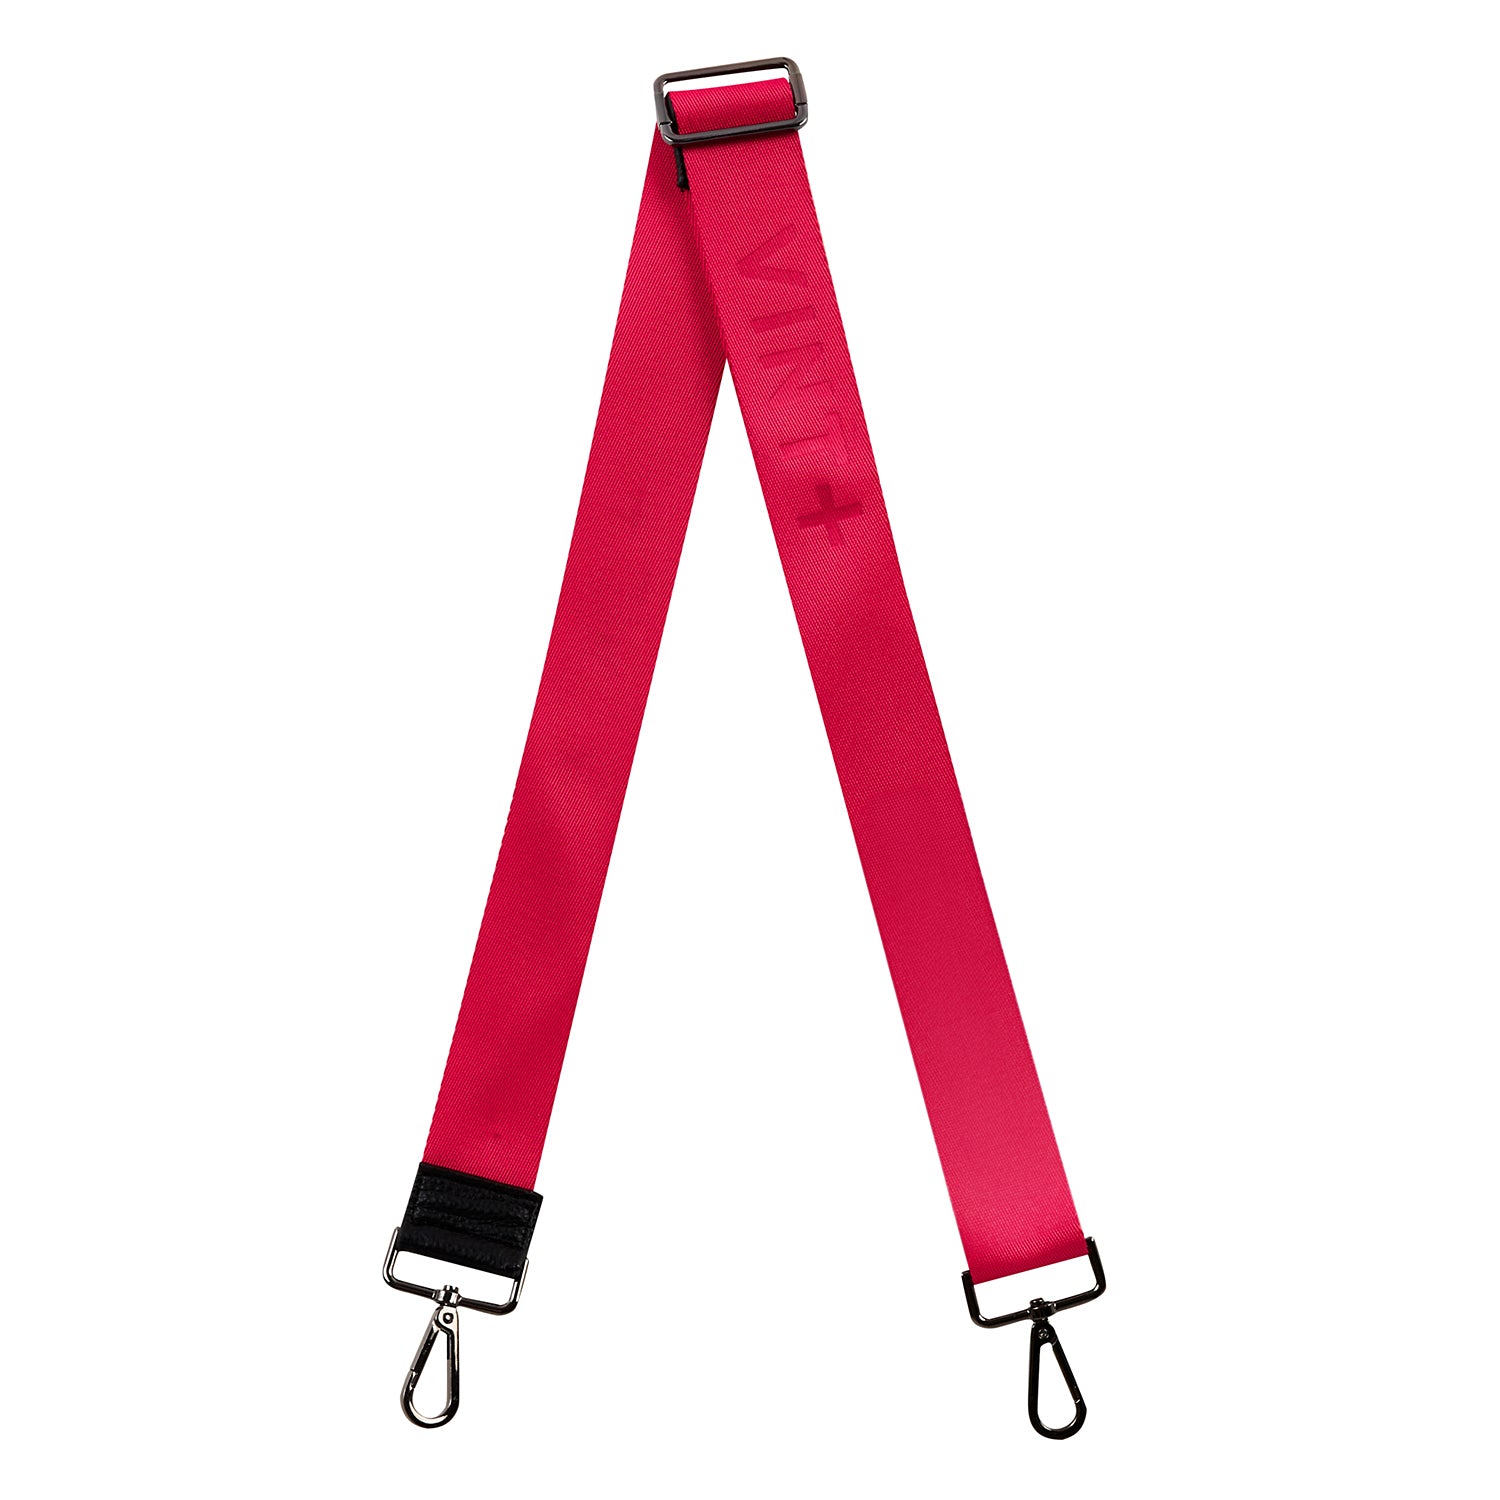 CARRY STRAP - RED